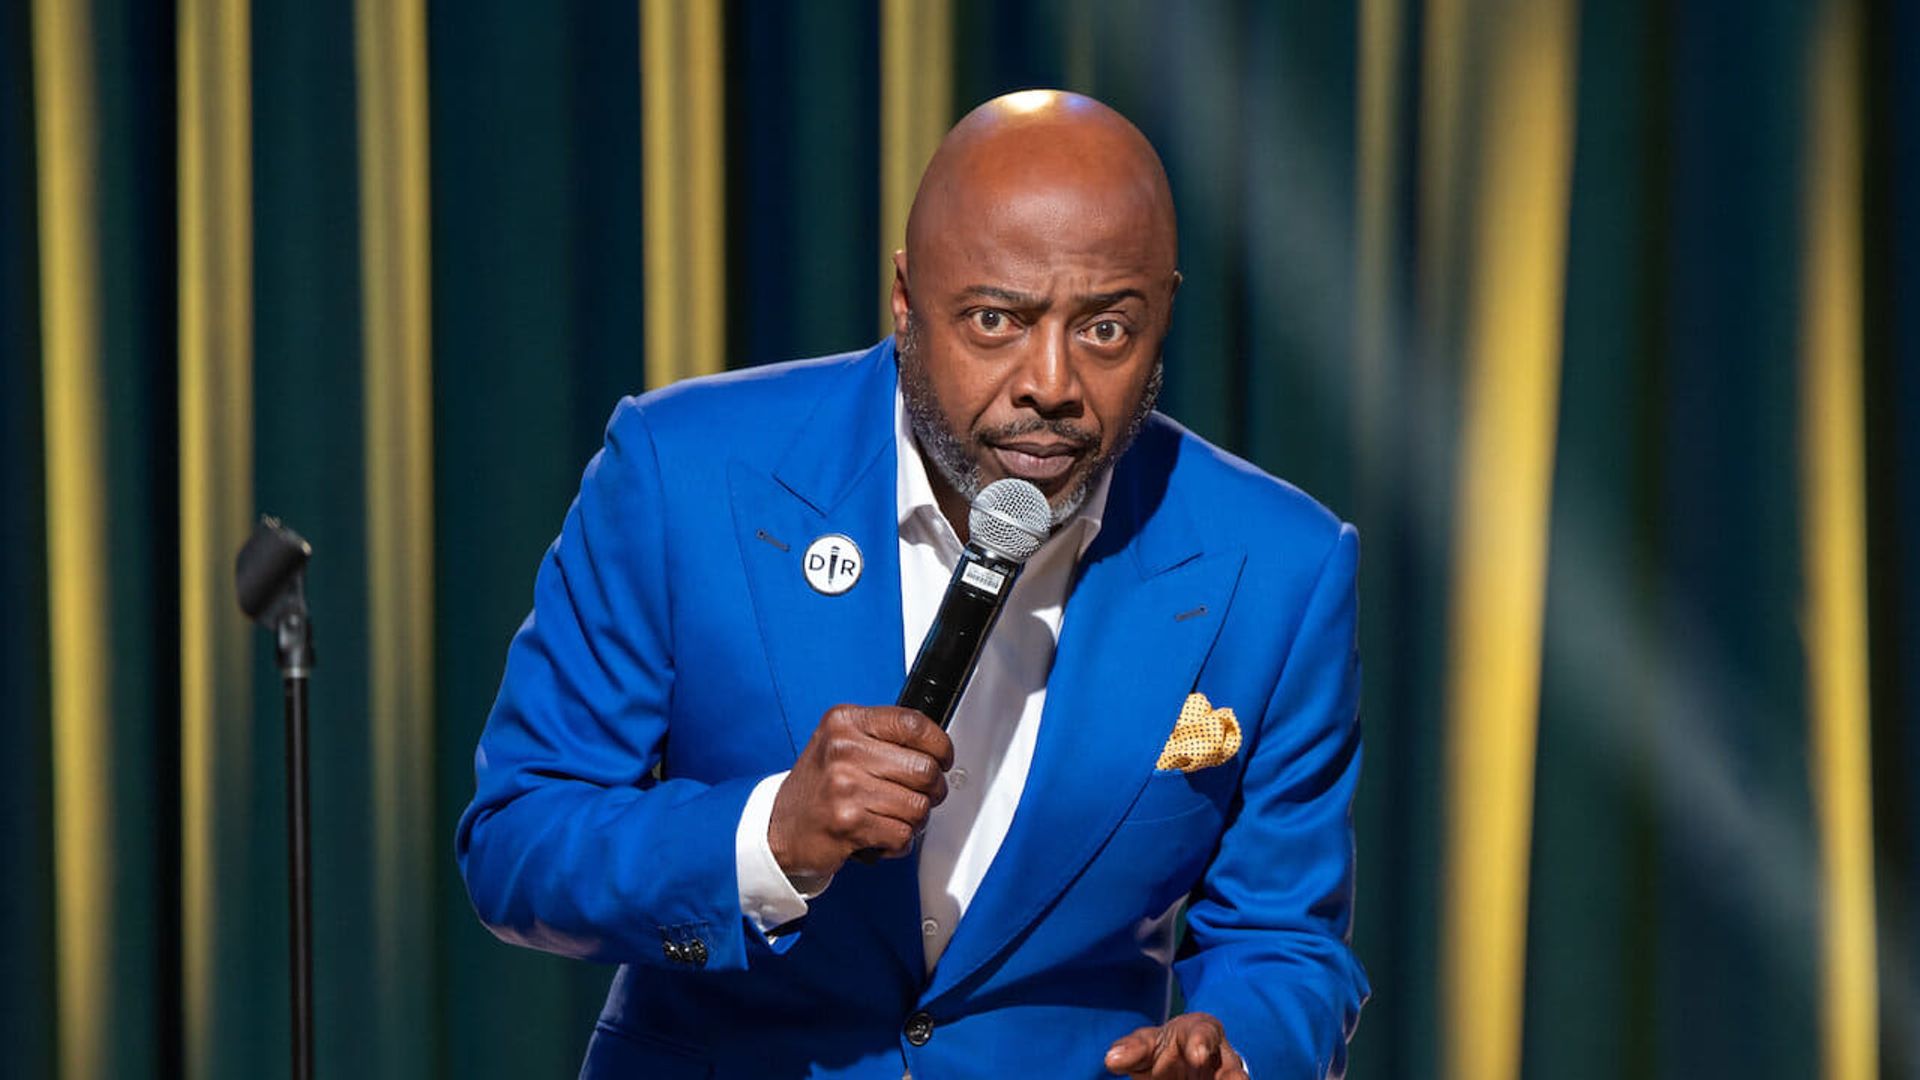 Chappelle's Home Team: Donnell Rawlings - A New Day background